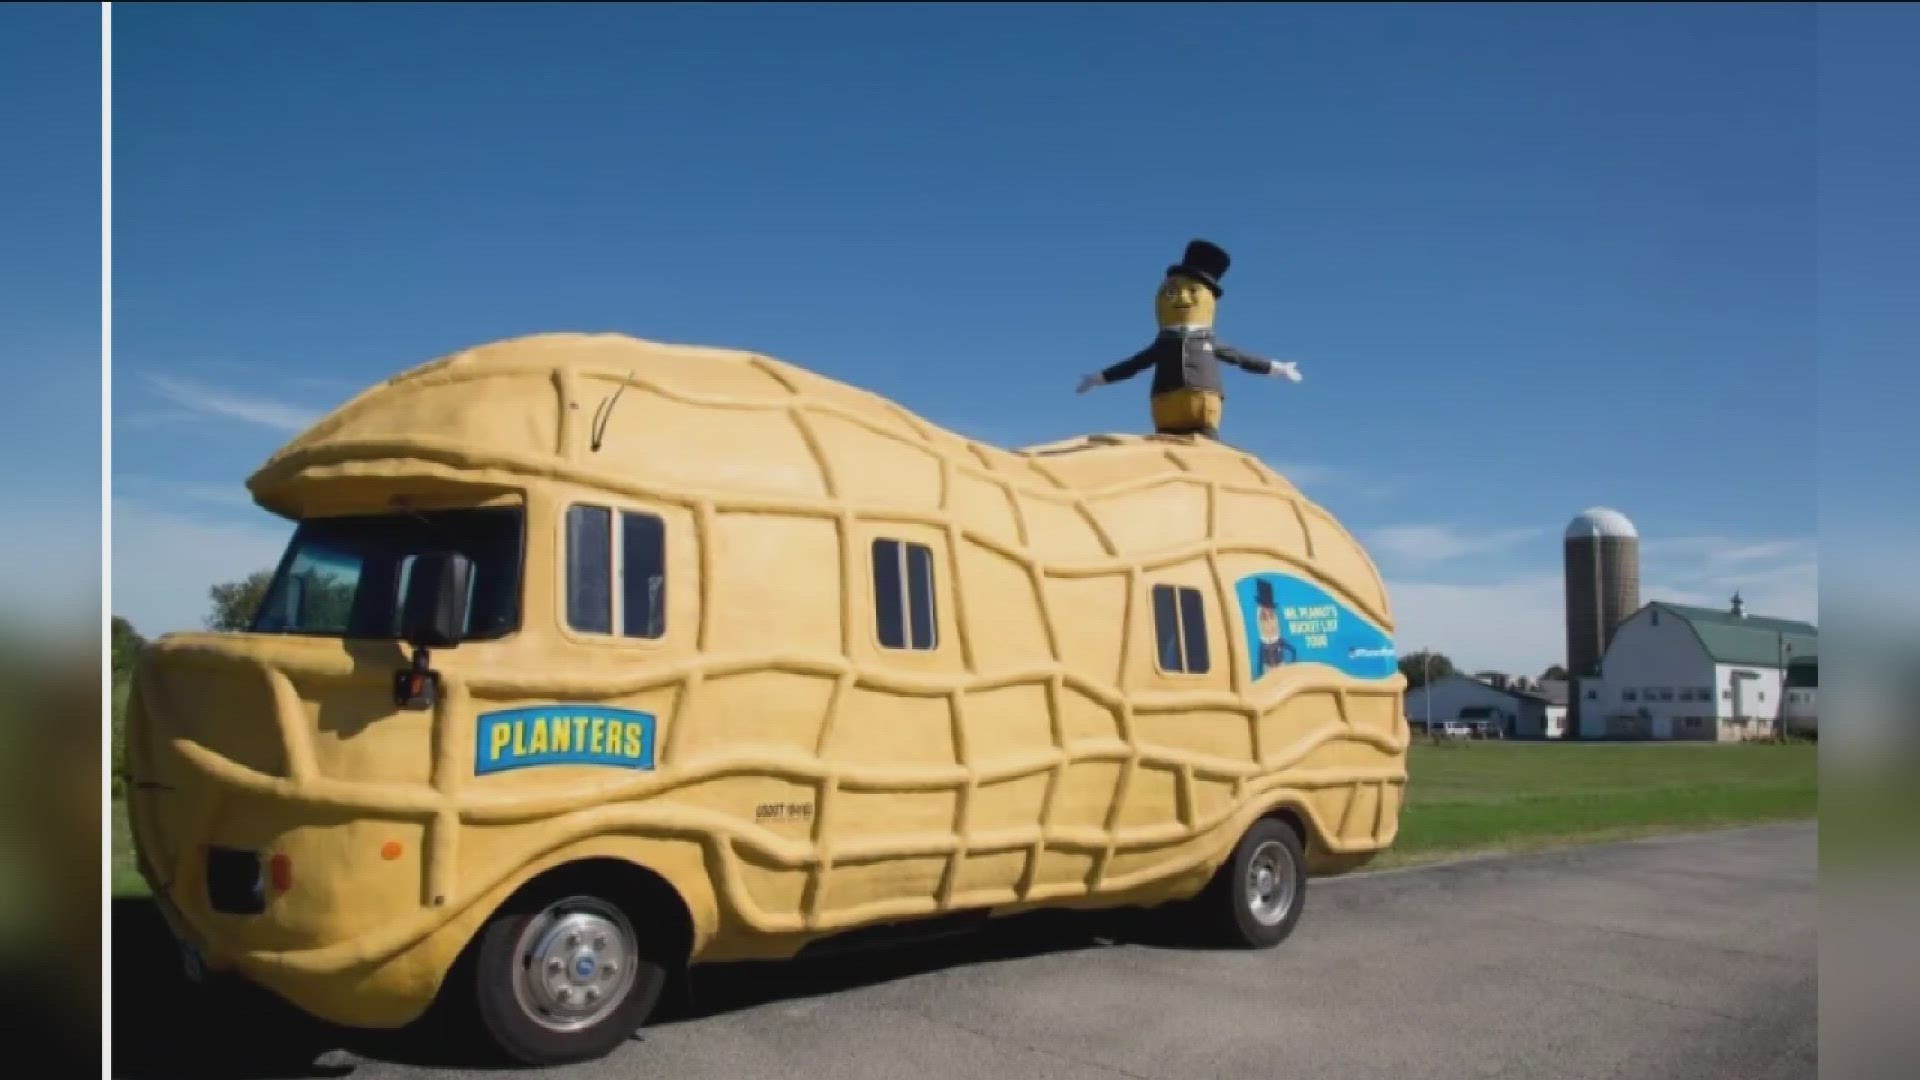 Planters Peanuts is looking to hire drivers for its NUTmobile. Watch the video for details.